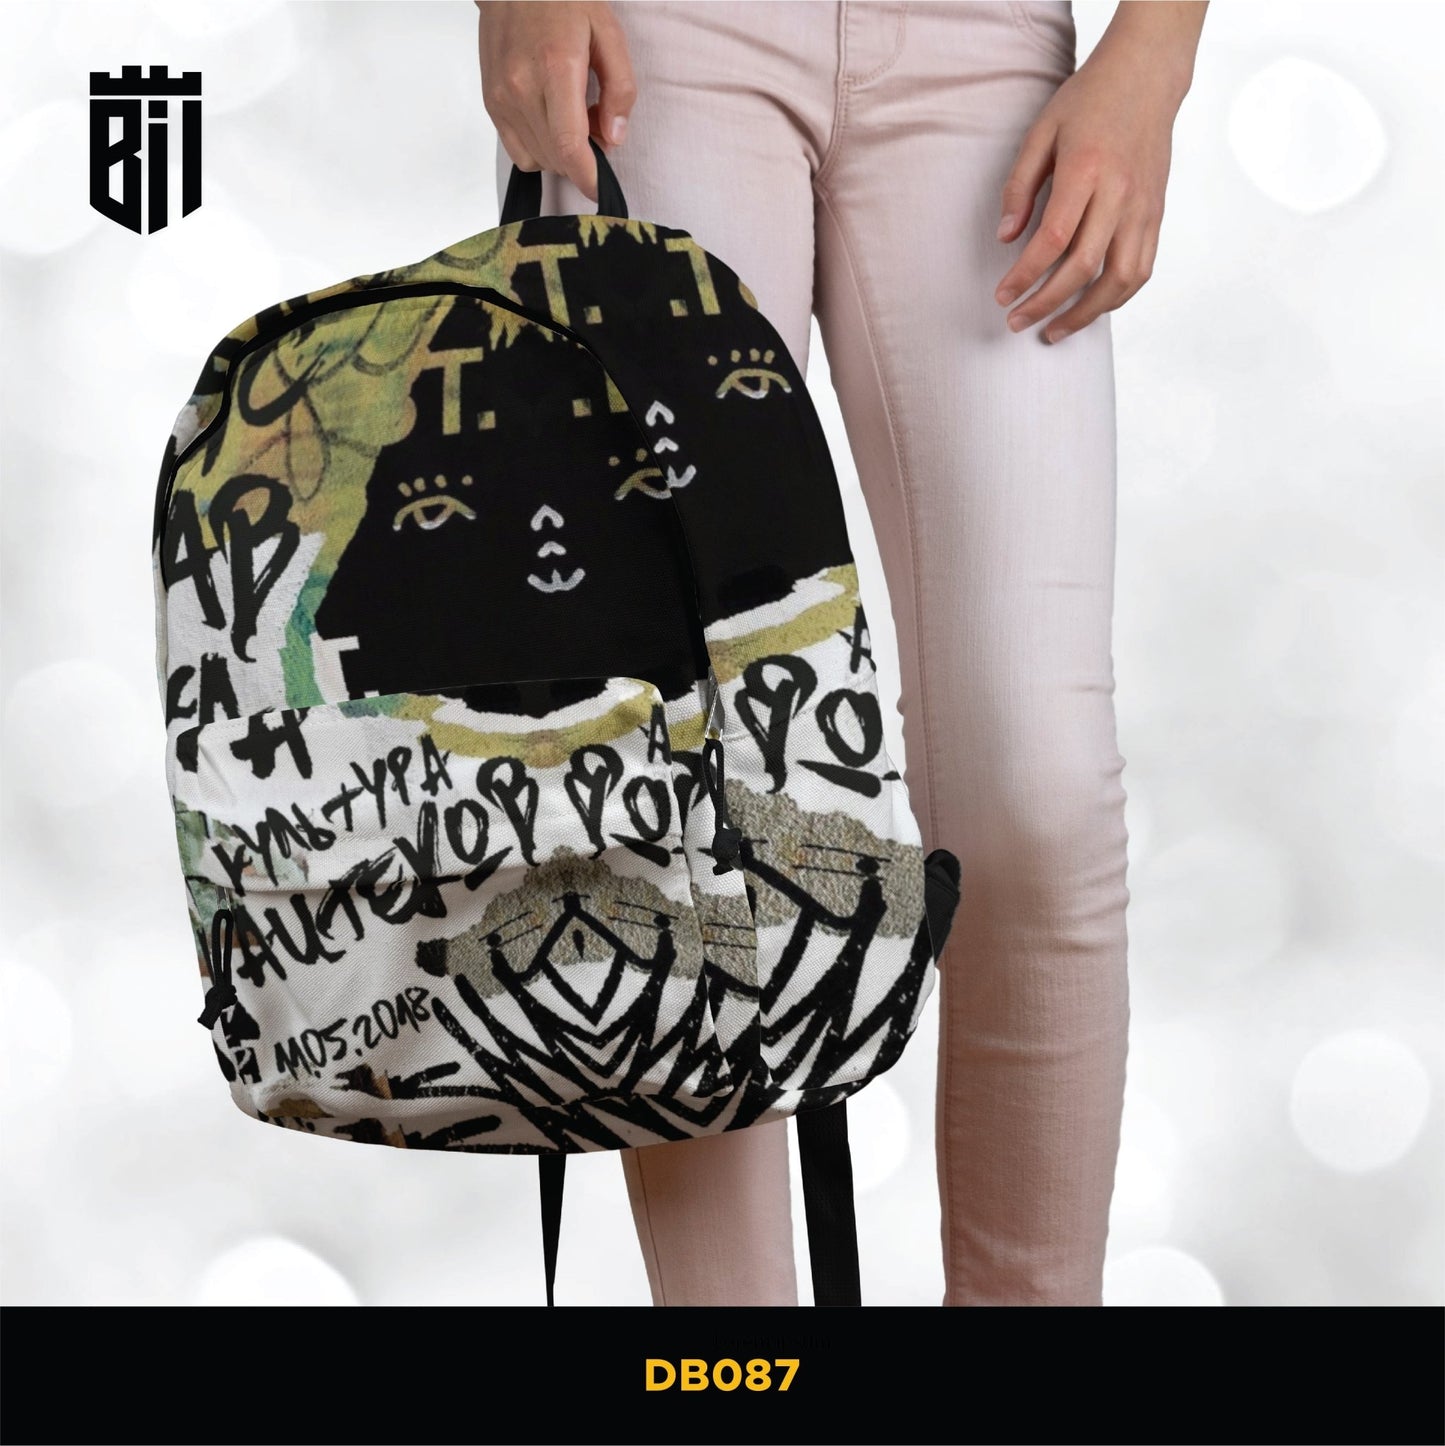 DB087 Typography Art Allover Printed Backpack - BREACHIT